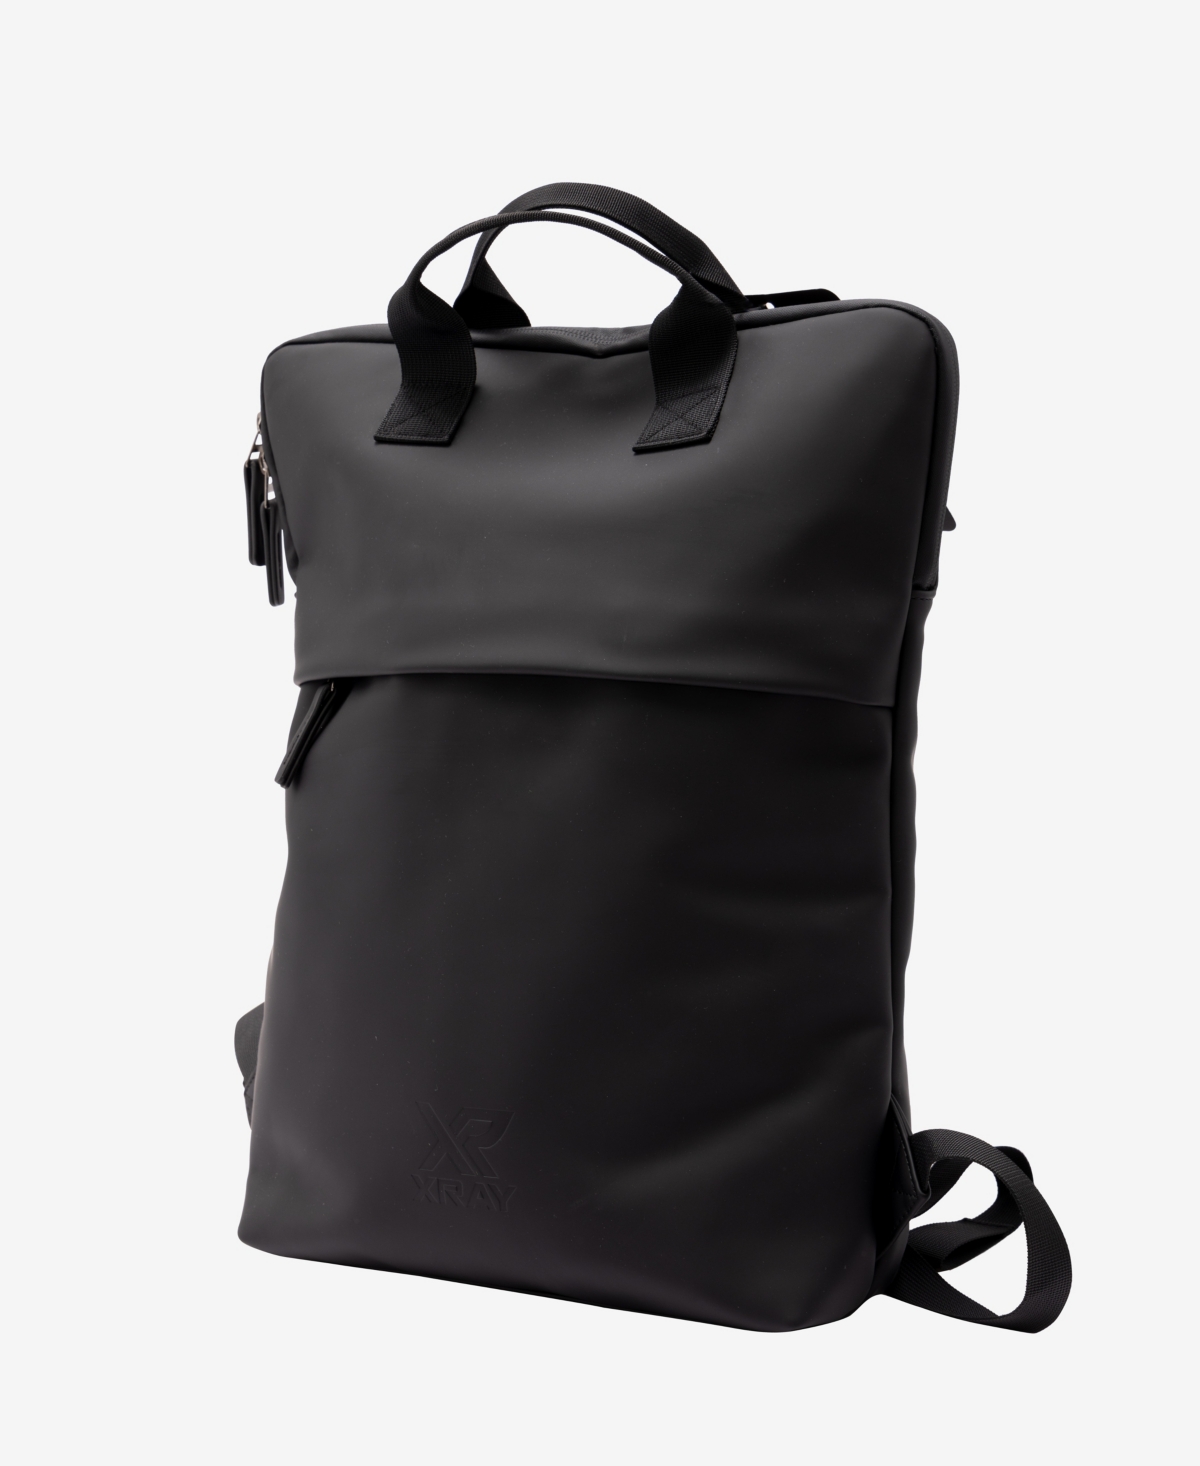 X-ray Compact Pu Laptop Bag In Black